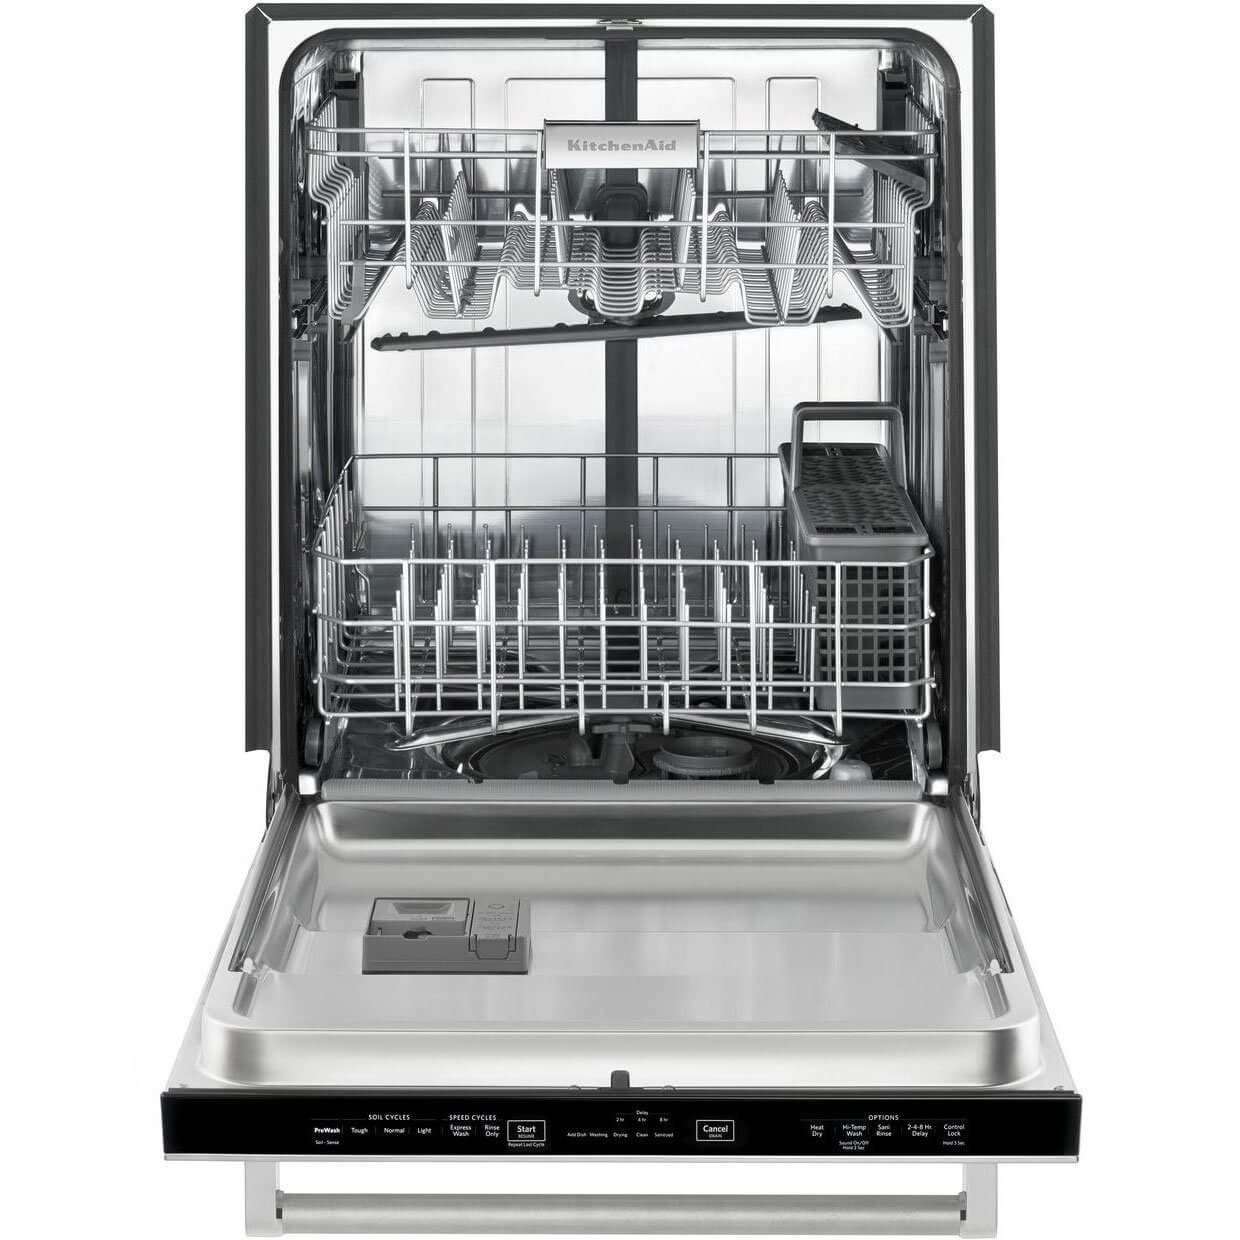 Kitchen Aid KDTE104ESS KDTE104ESS 46dB Stainless Dishwasher with Hidden Controls & Stainless Tub